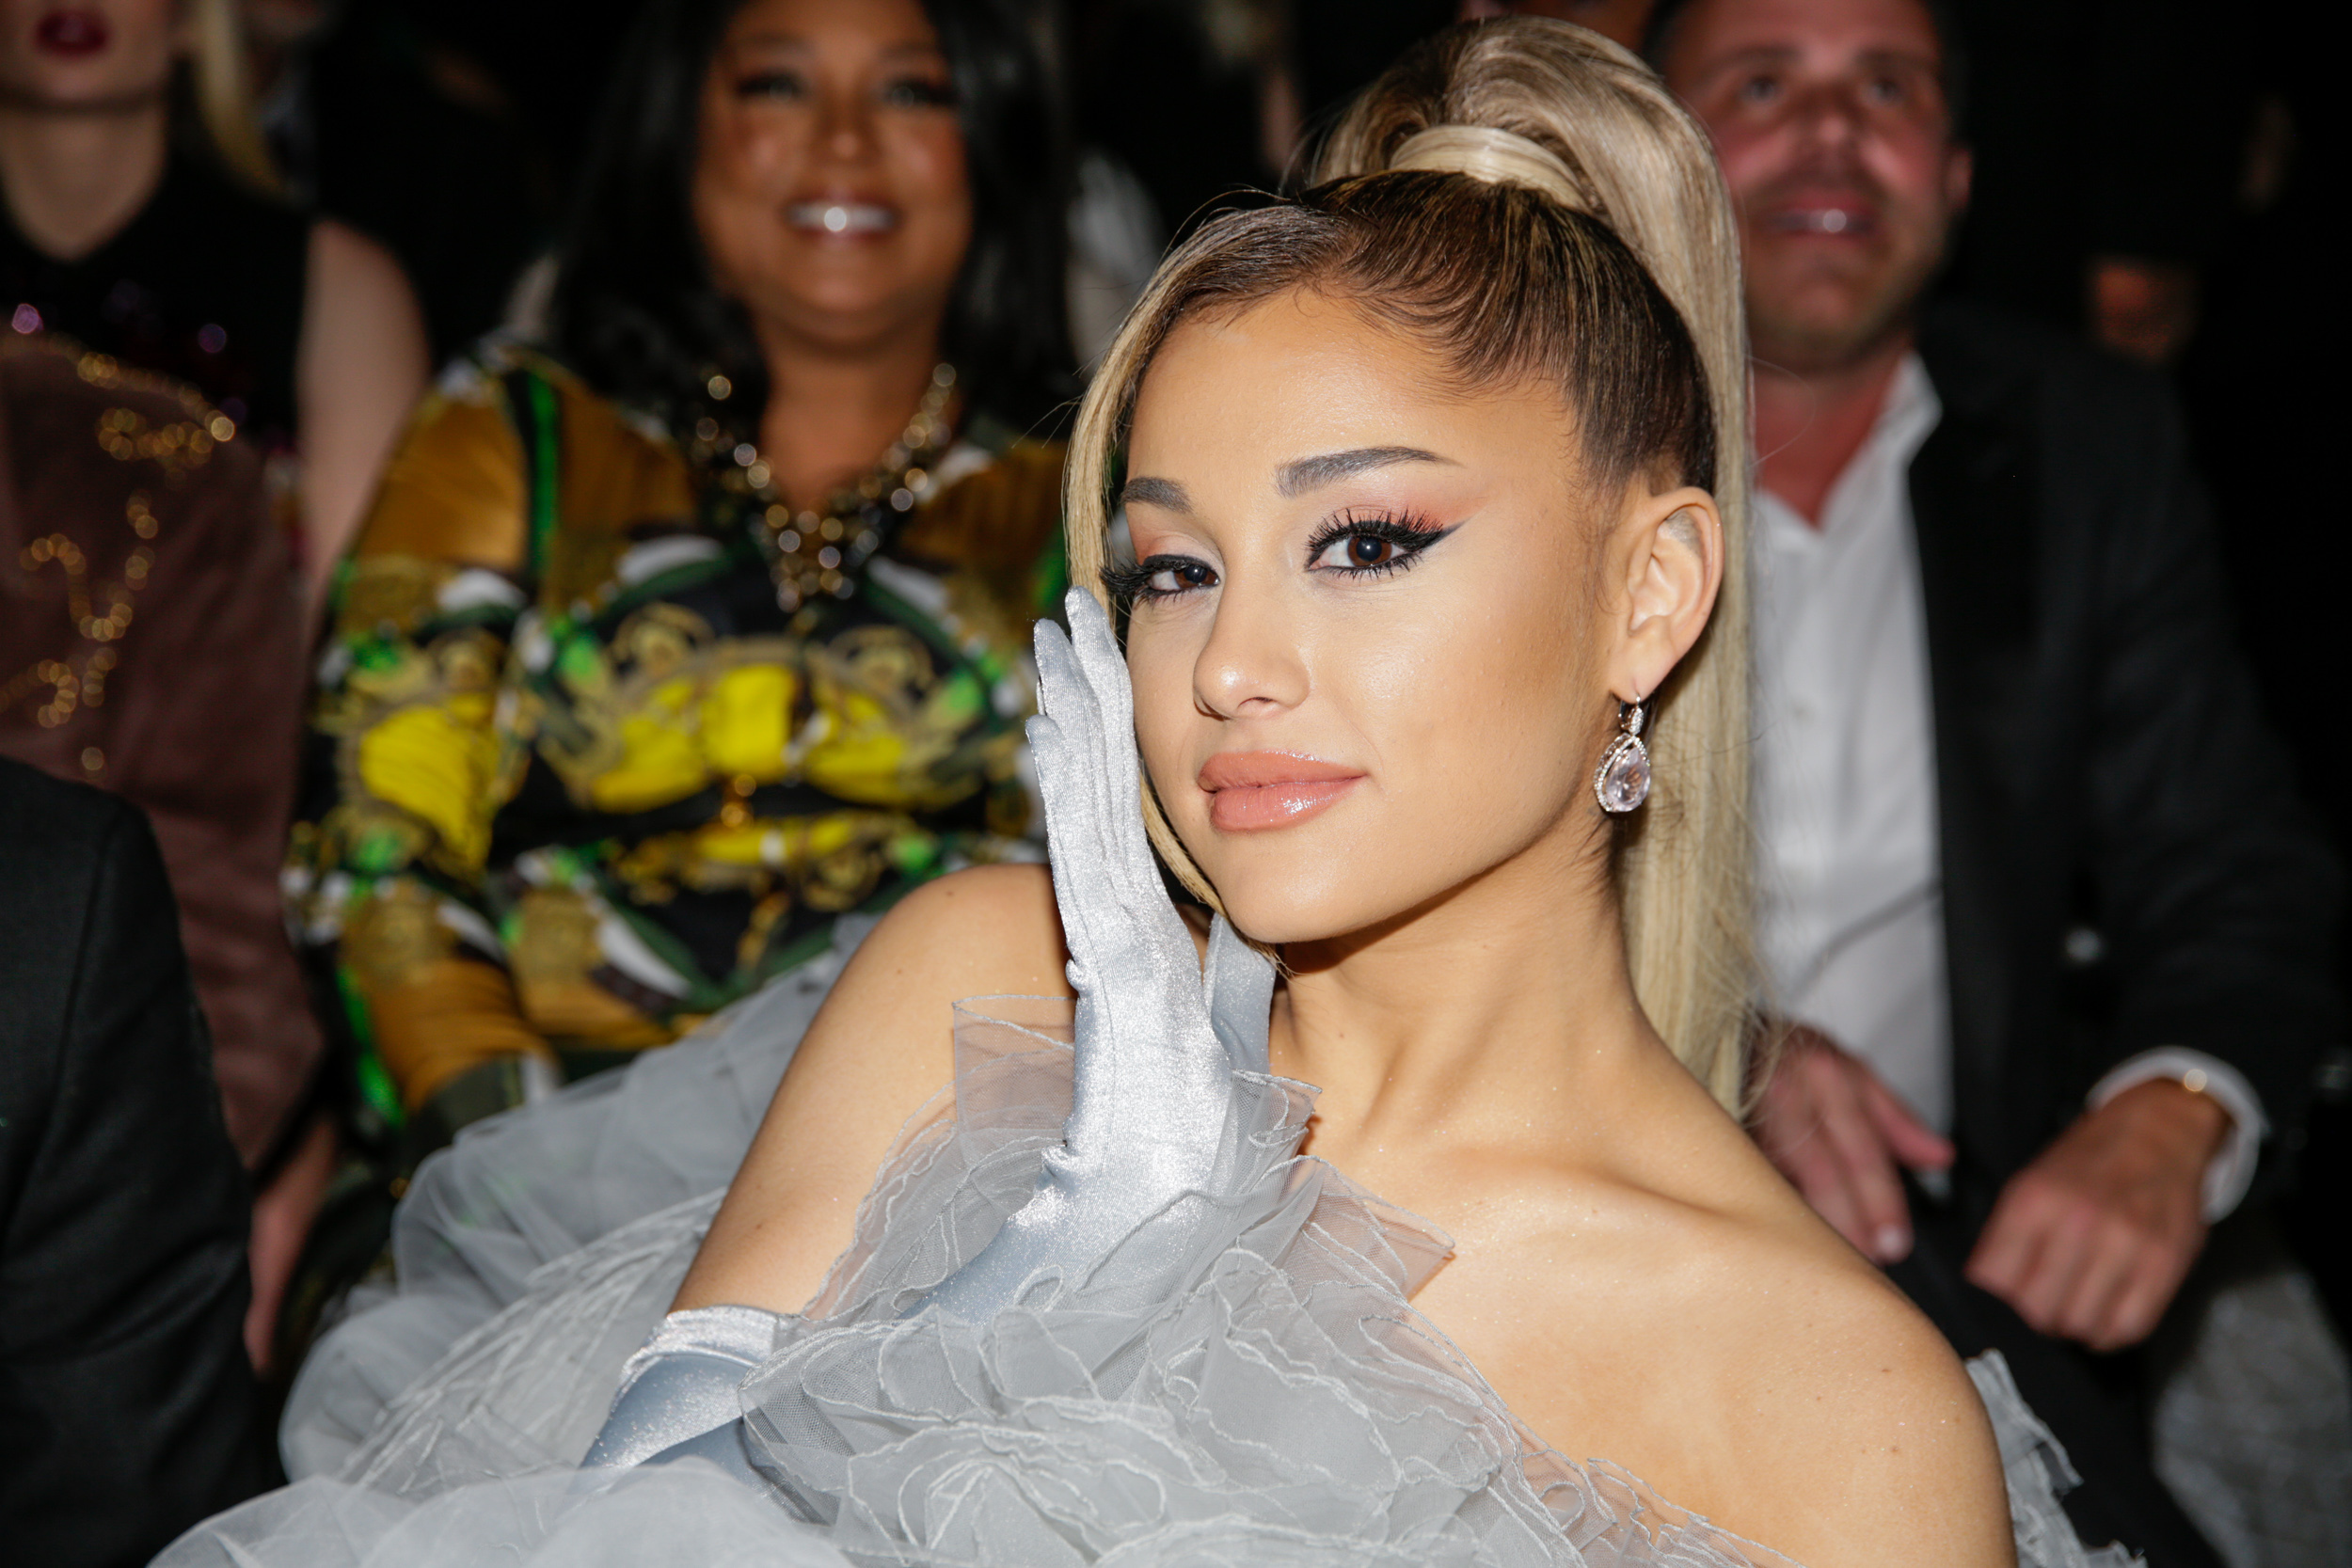 Ariana Grande smiles for a photo on the red carpet